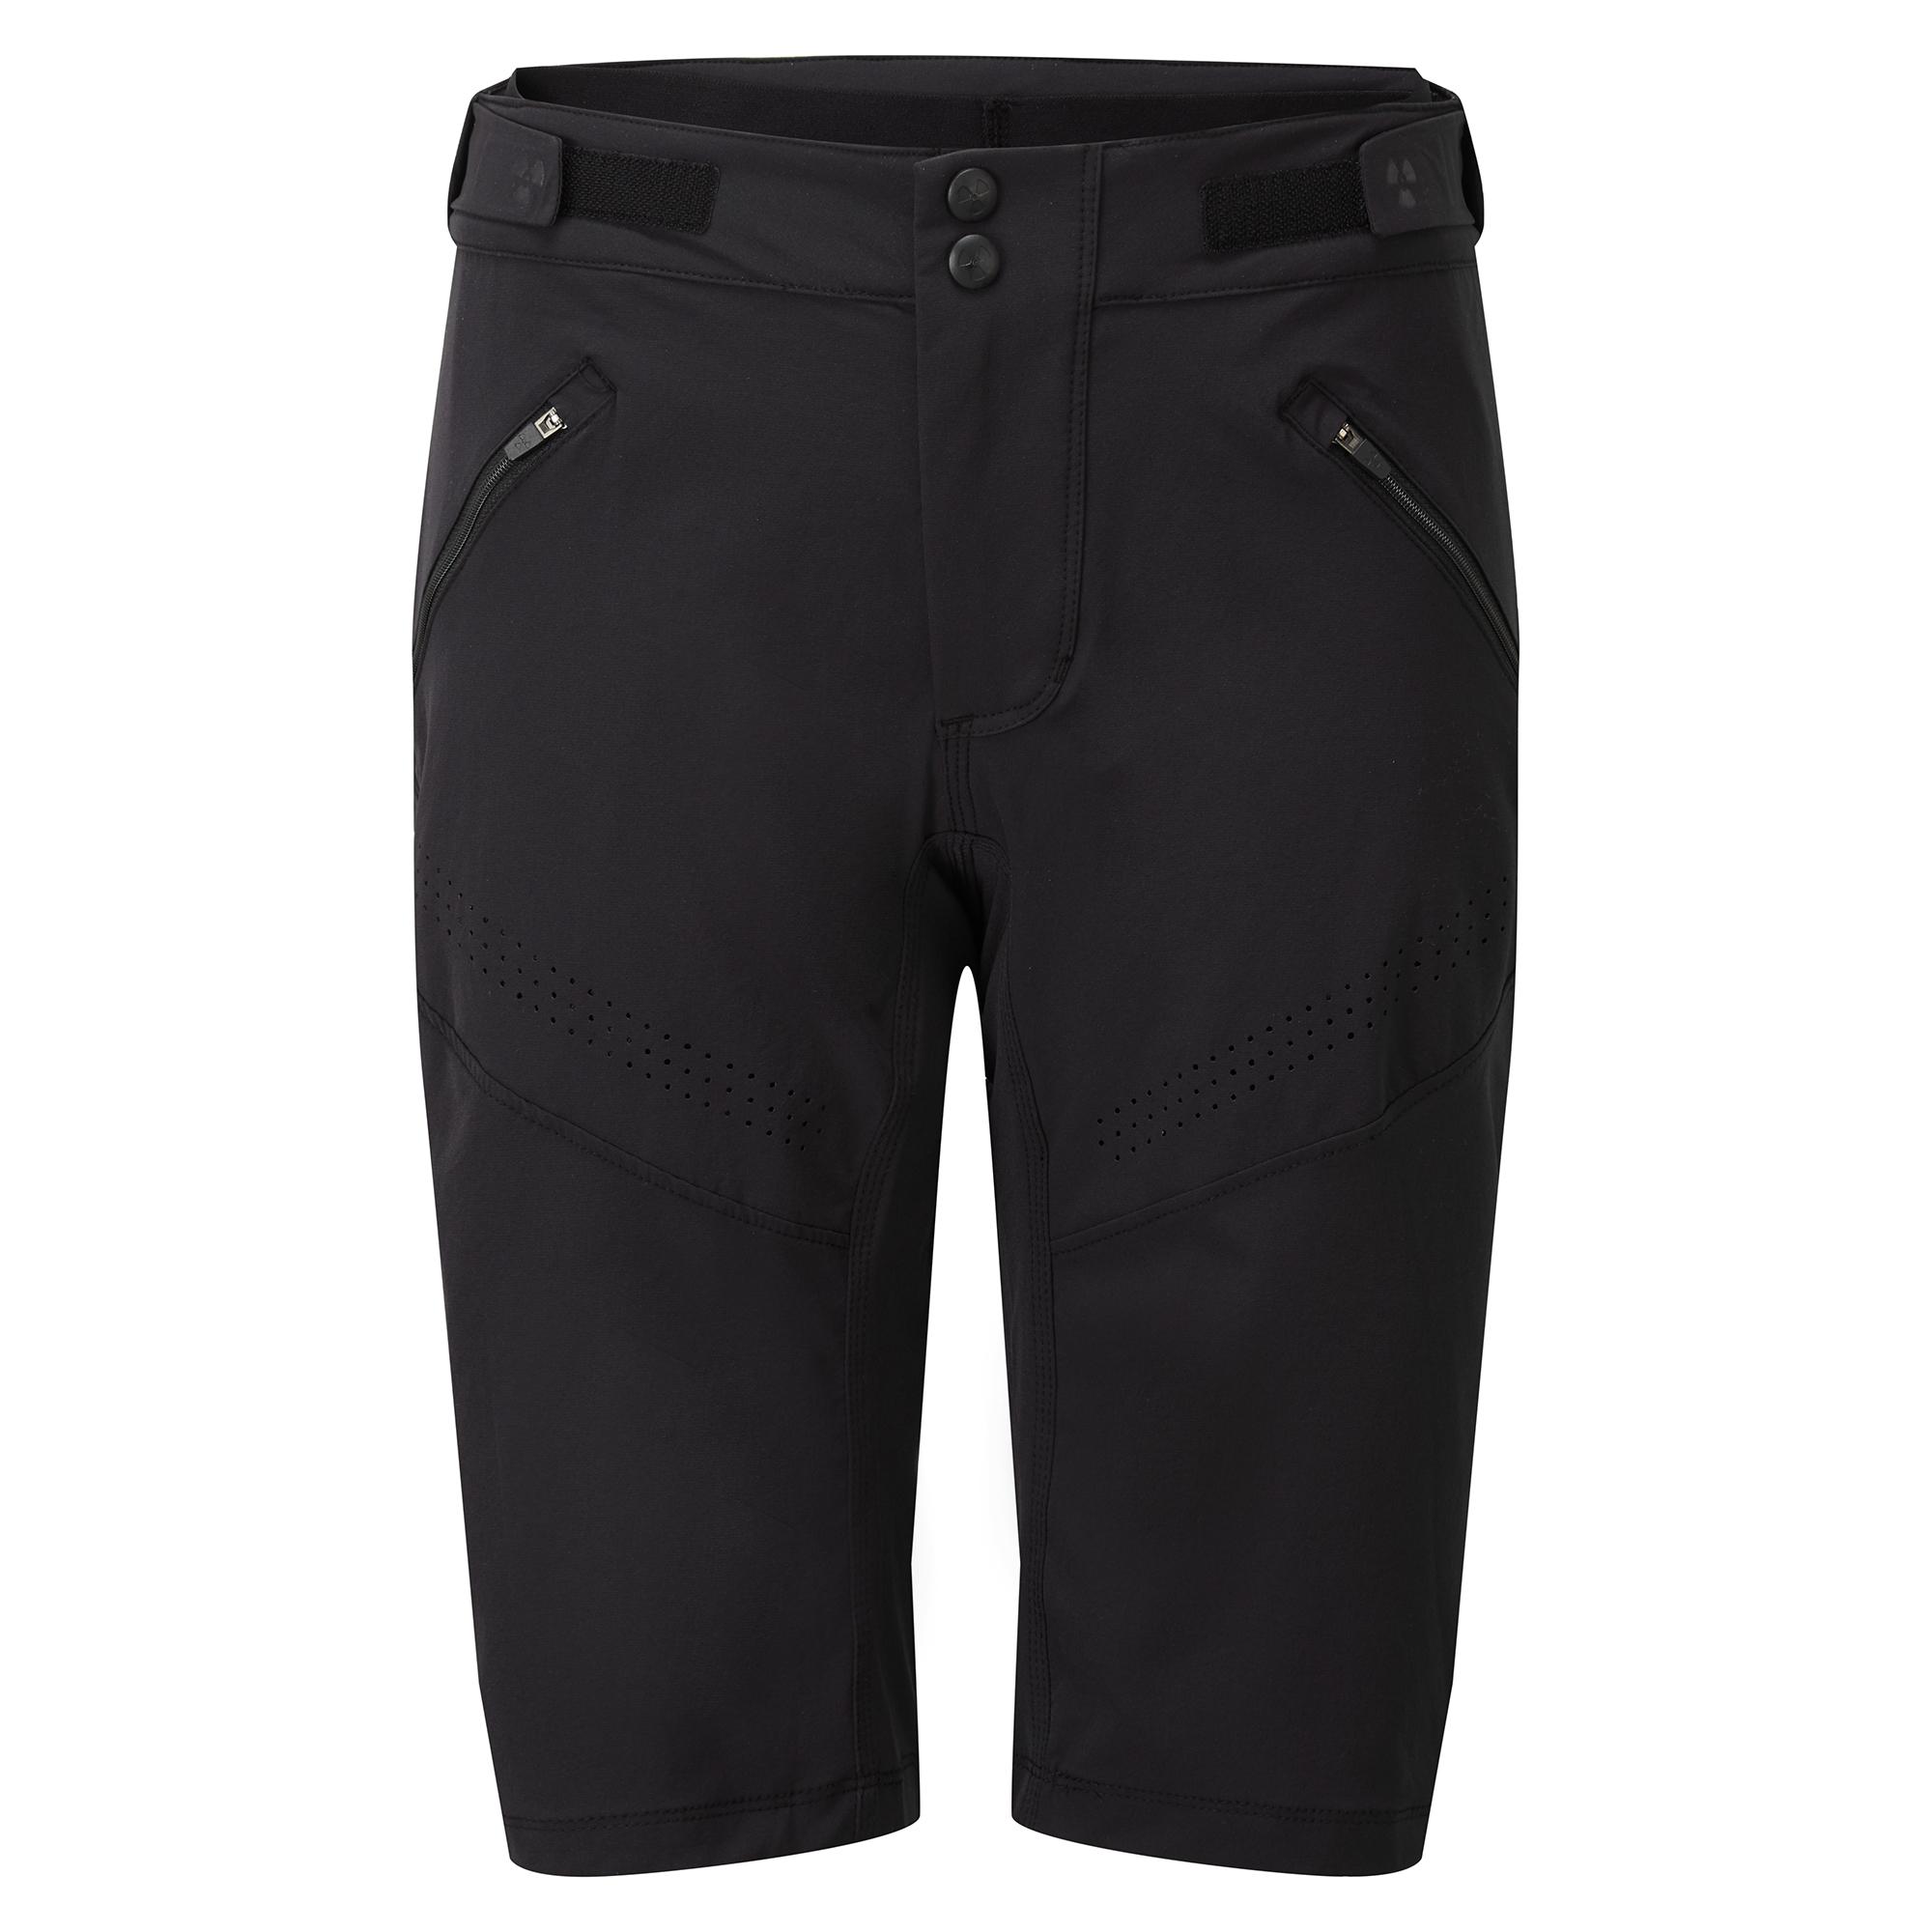 Nukeproof Blackline Womens Shorts With Liner  Black